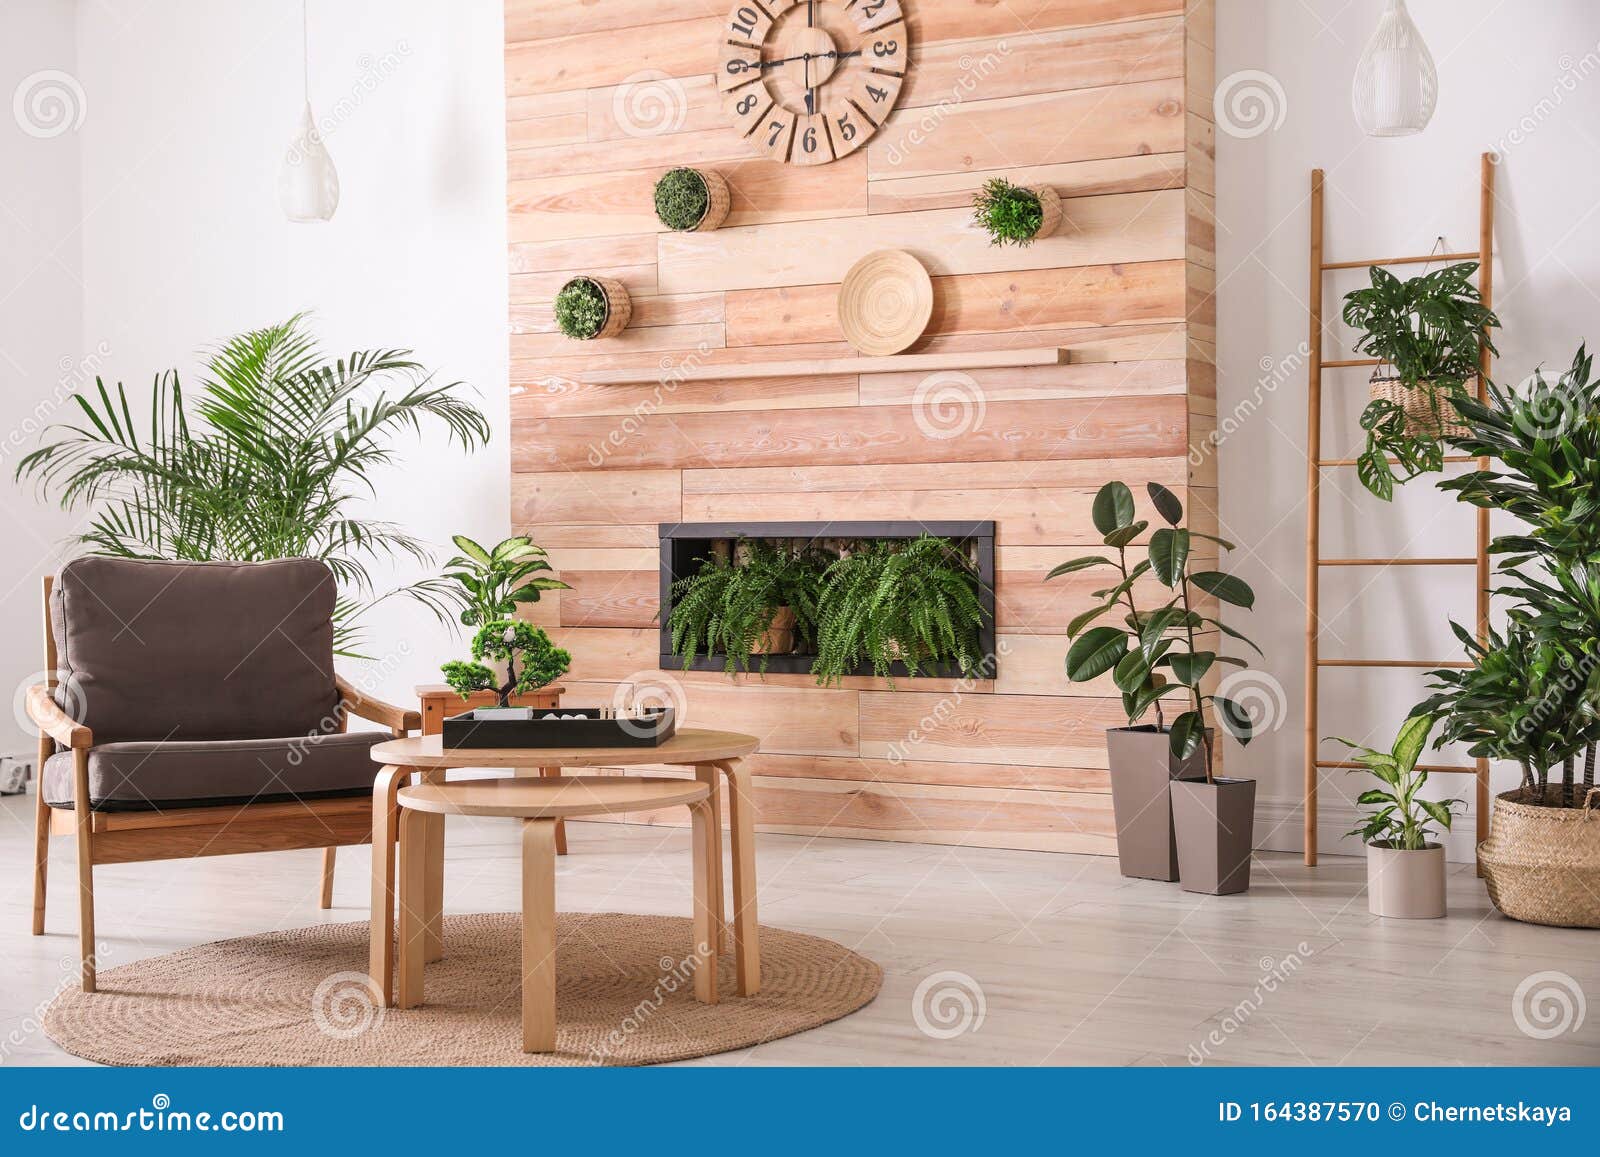 Stylish Living Room Interior with Armchair, Plants and Miniature ...